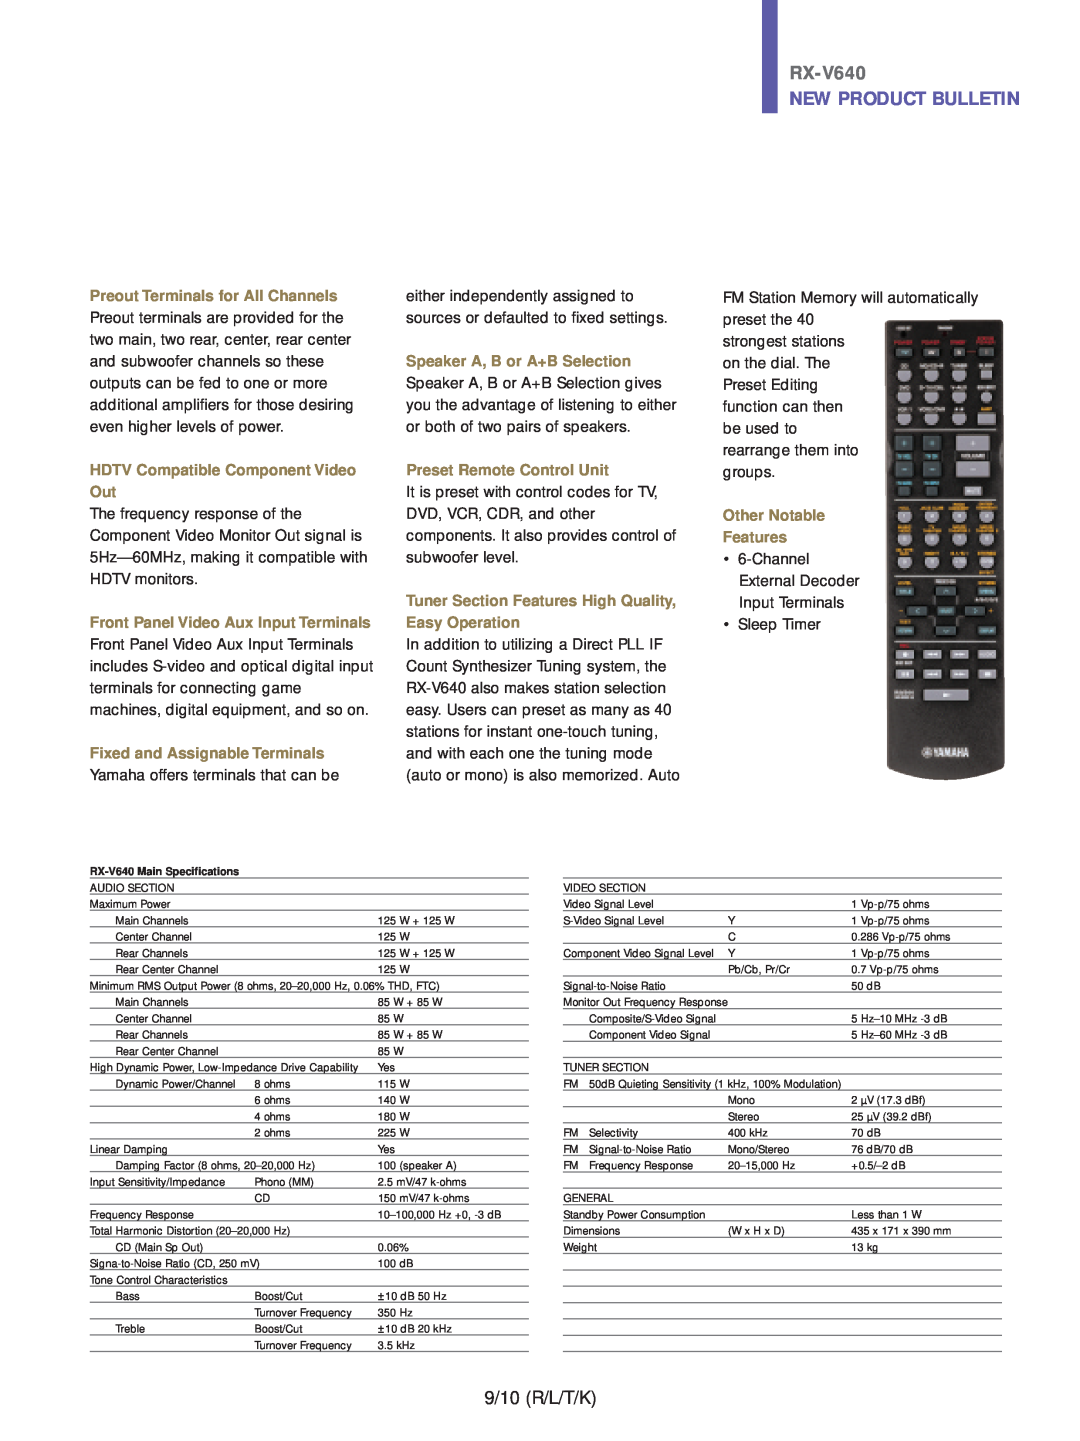 Yamaha RX-V640 9/10 R/L/T/K, New Product Bulletin, Preout Terminals for All Channels, HDTV Compatible Component Video Out 